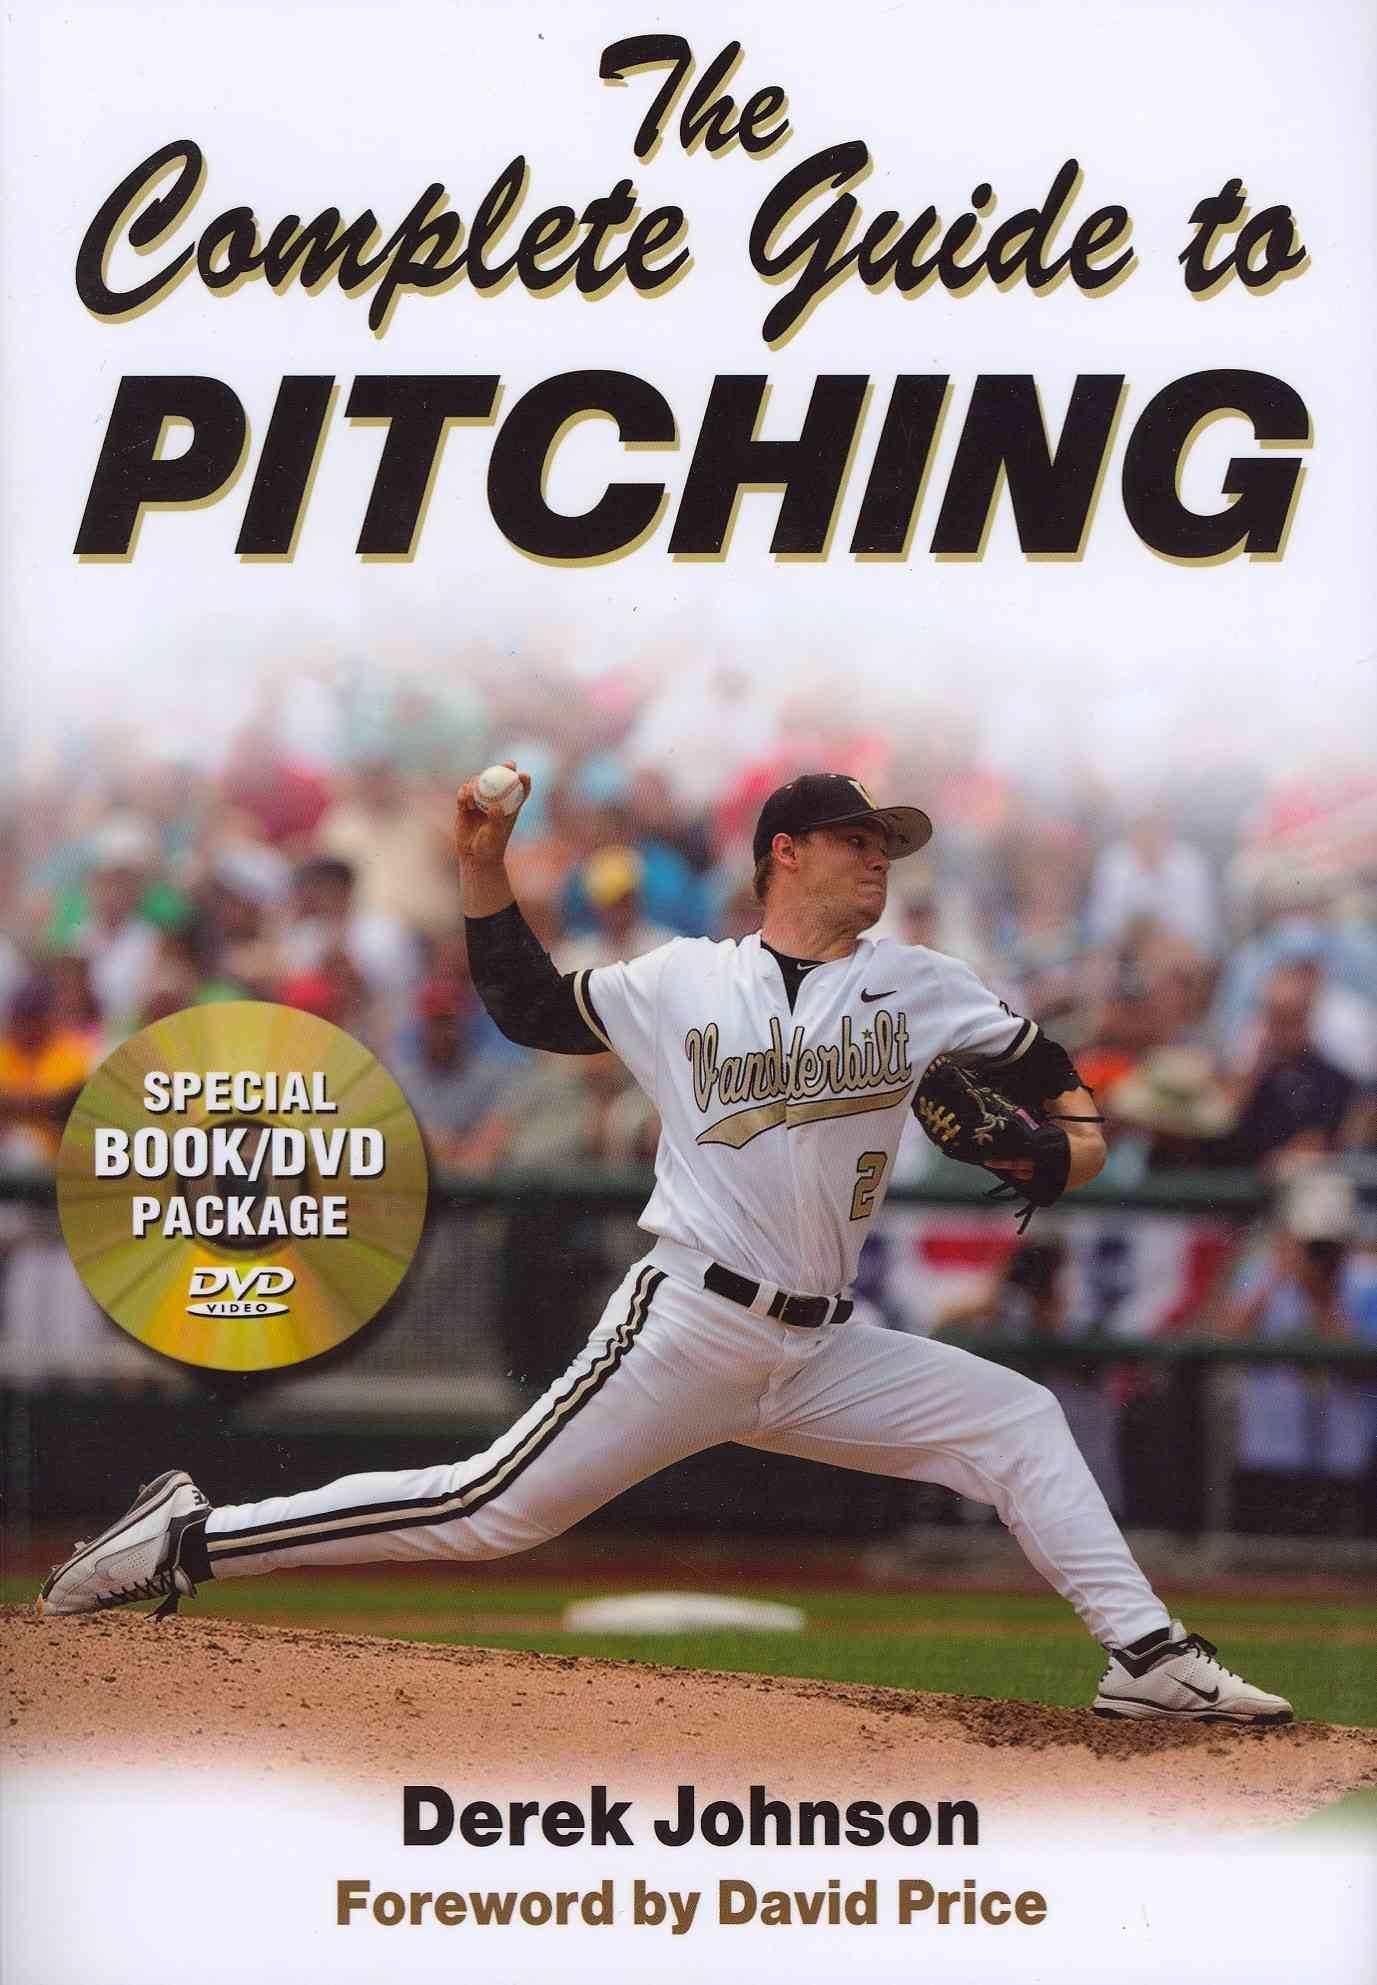 The Complete Guide to Pitching